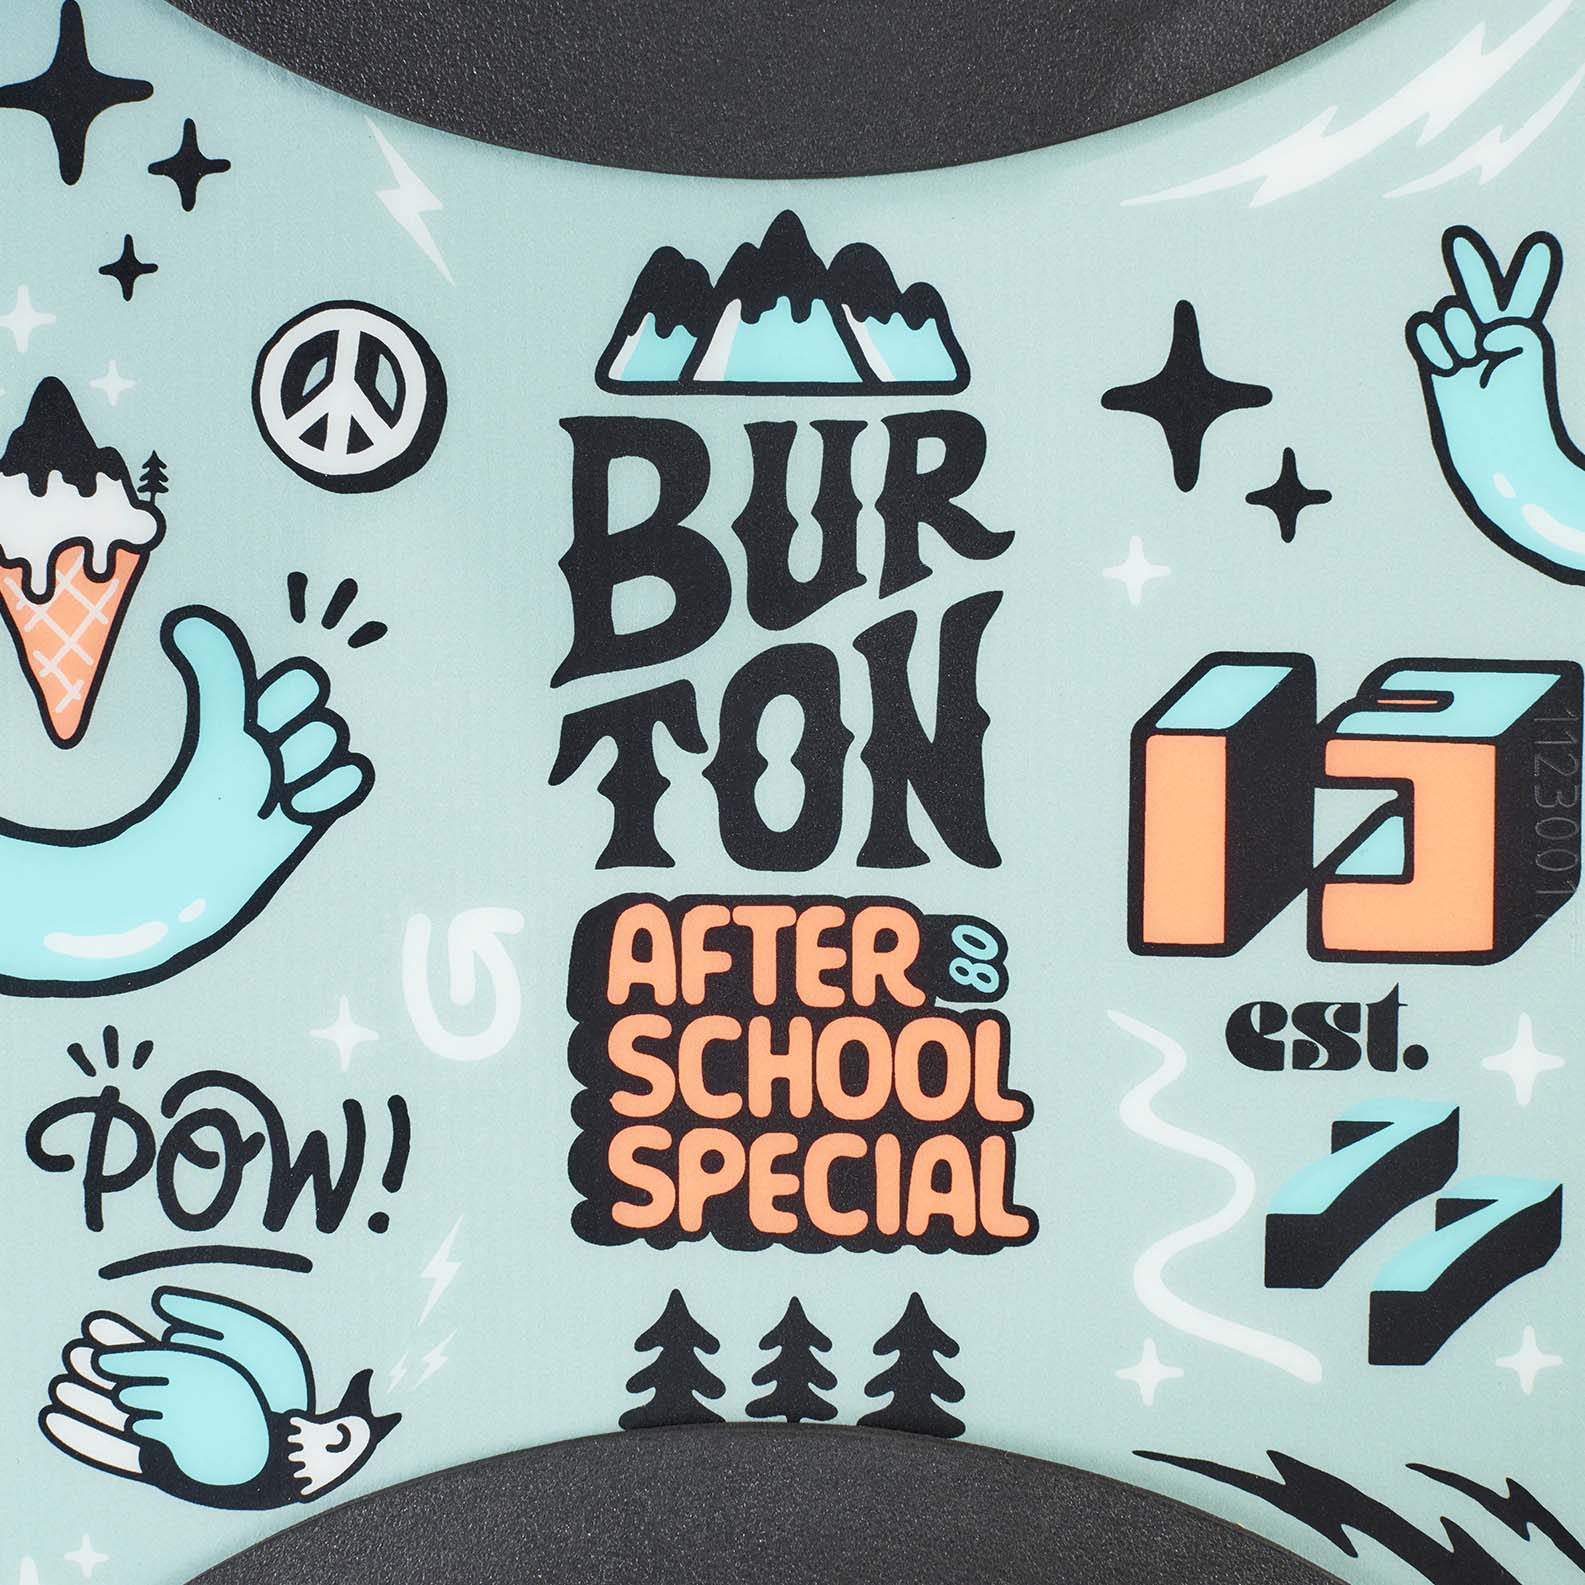 Burton After School Special Kids All Mountain Snowboard Package